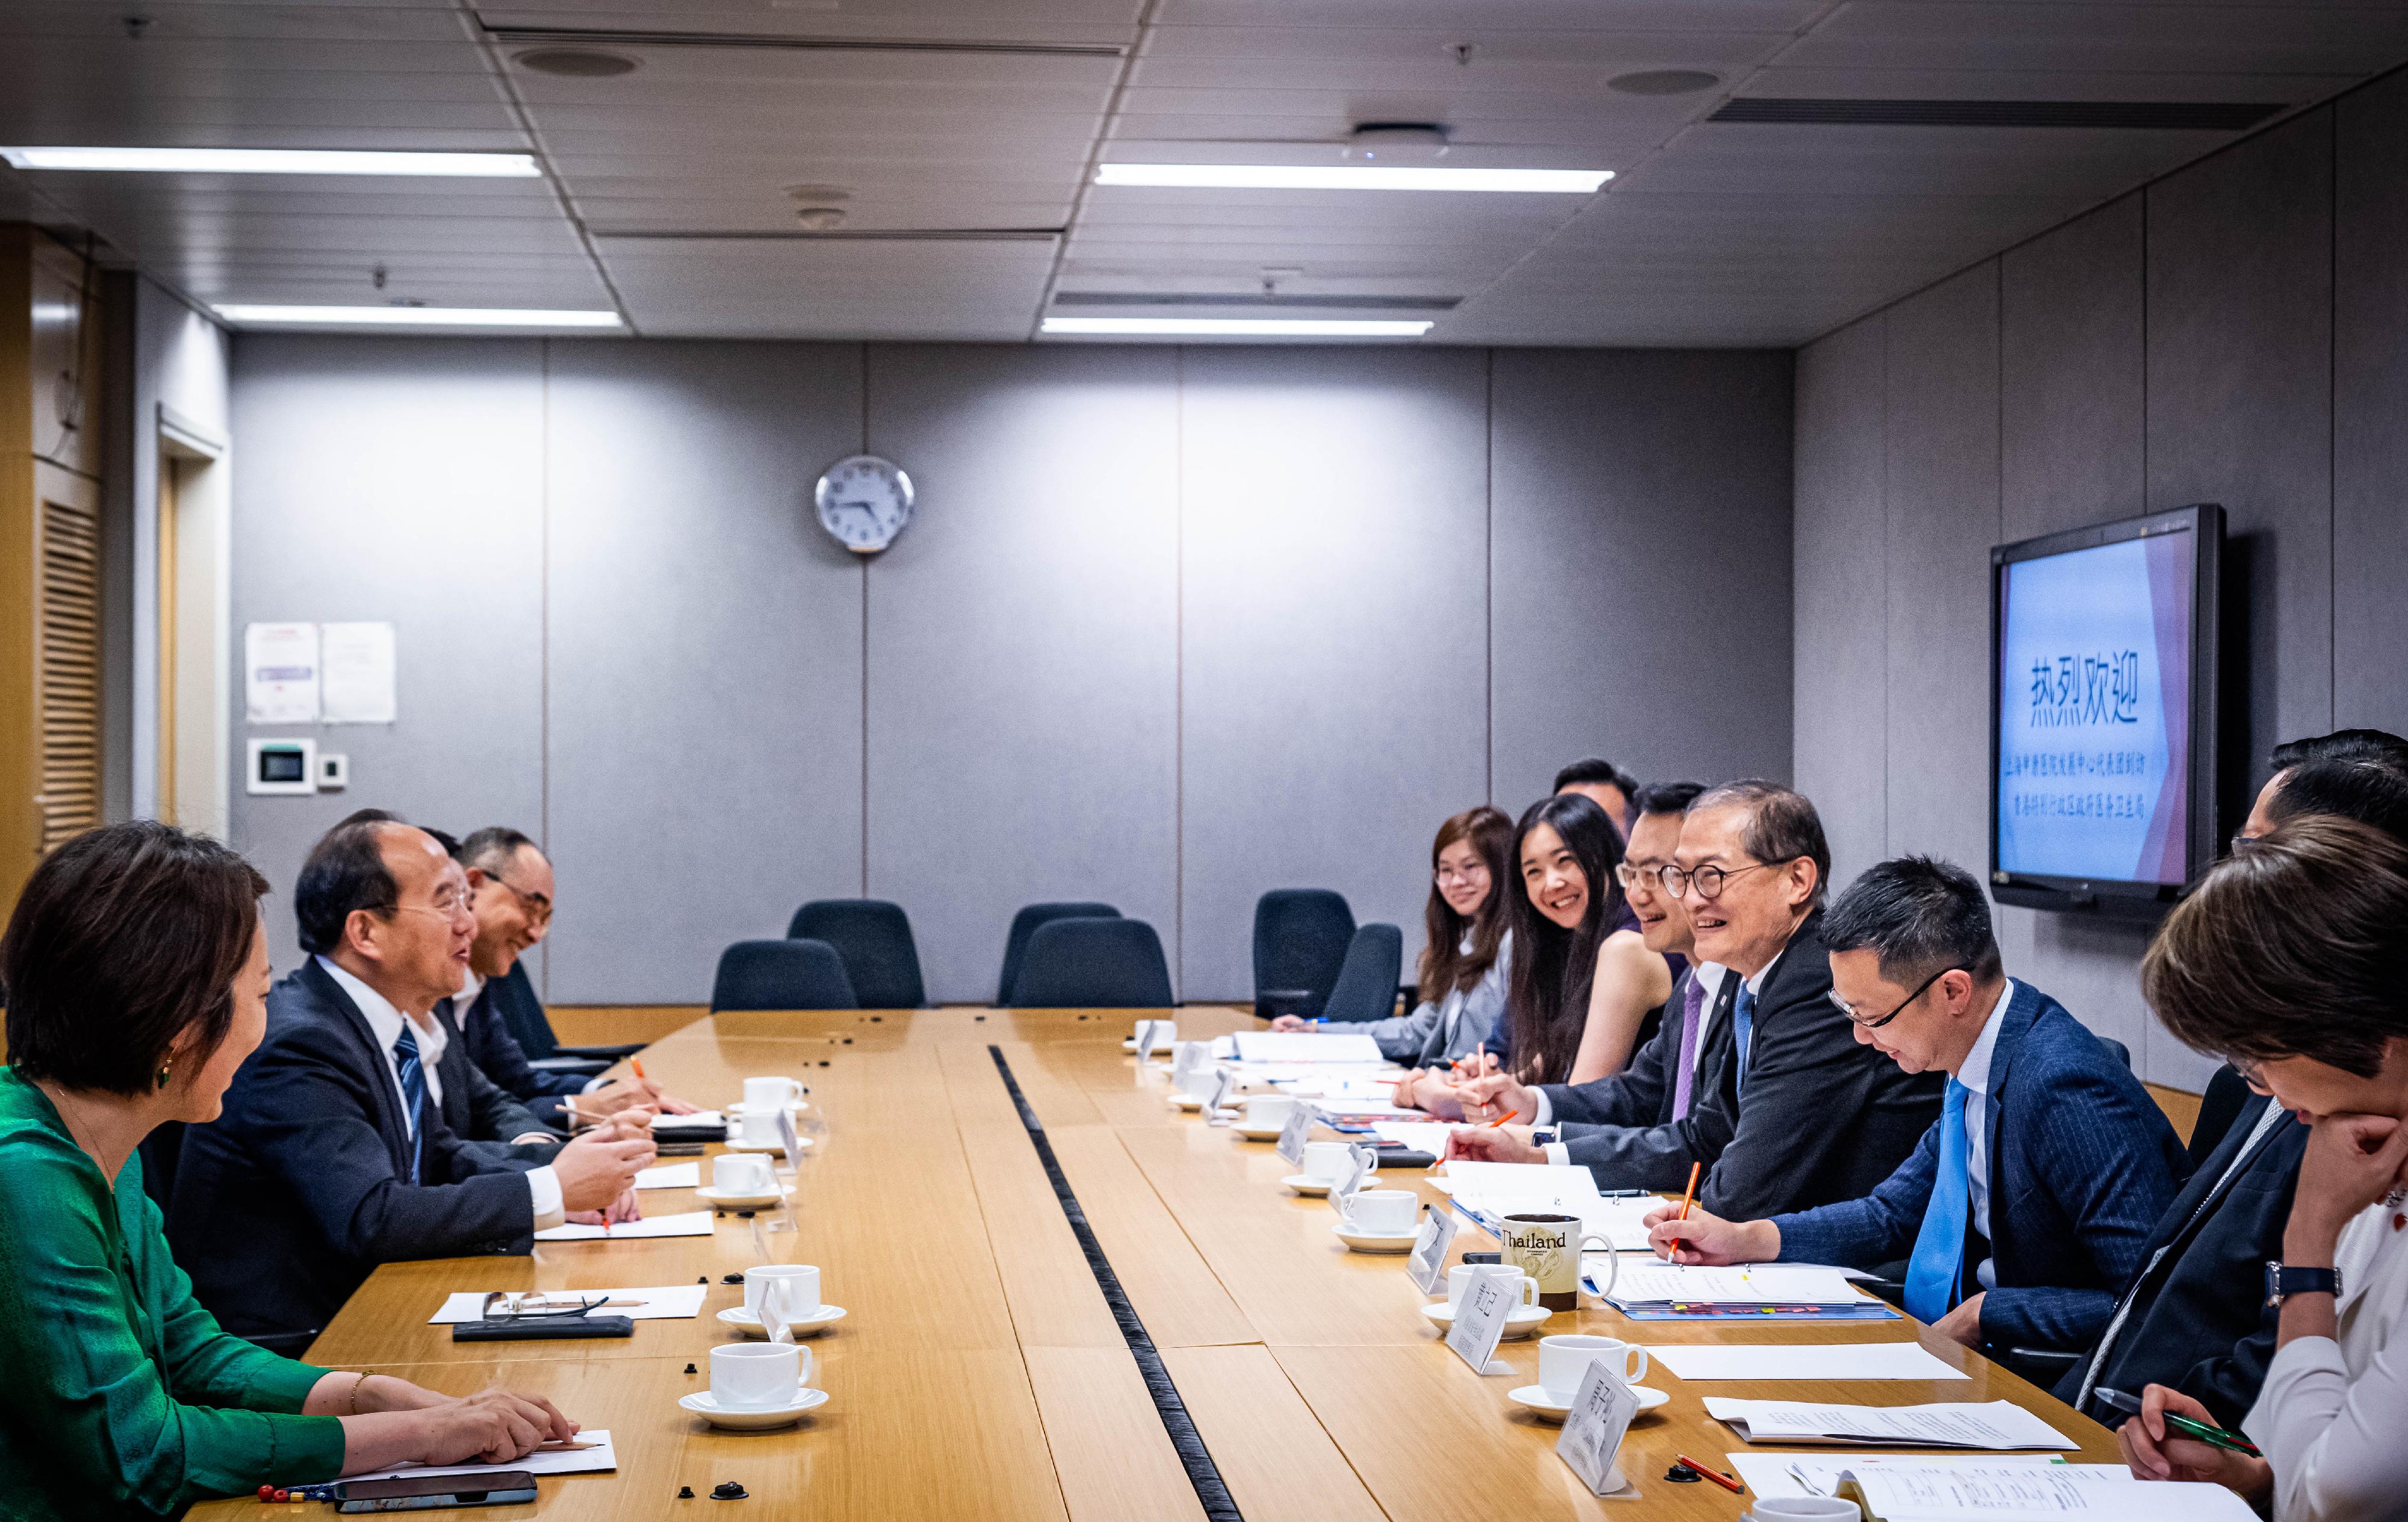 The Secretary for Health, Professor Lo Chung-mau (fourth right), meets with a delegation led by Vice Director General of the Shanghai Hospital Development Center Mr Zheng Ning (second left) today (May 17) to explore areas for strengthening healthcare co-operation.  The Director of Health, Dr Ronald Lam (fifth right), also attended the meeting.